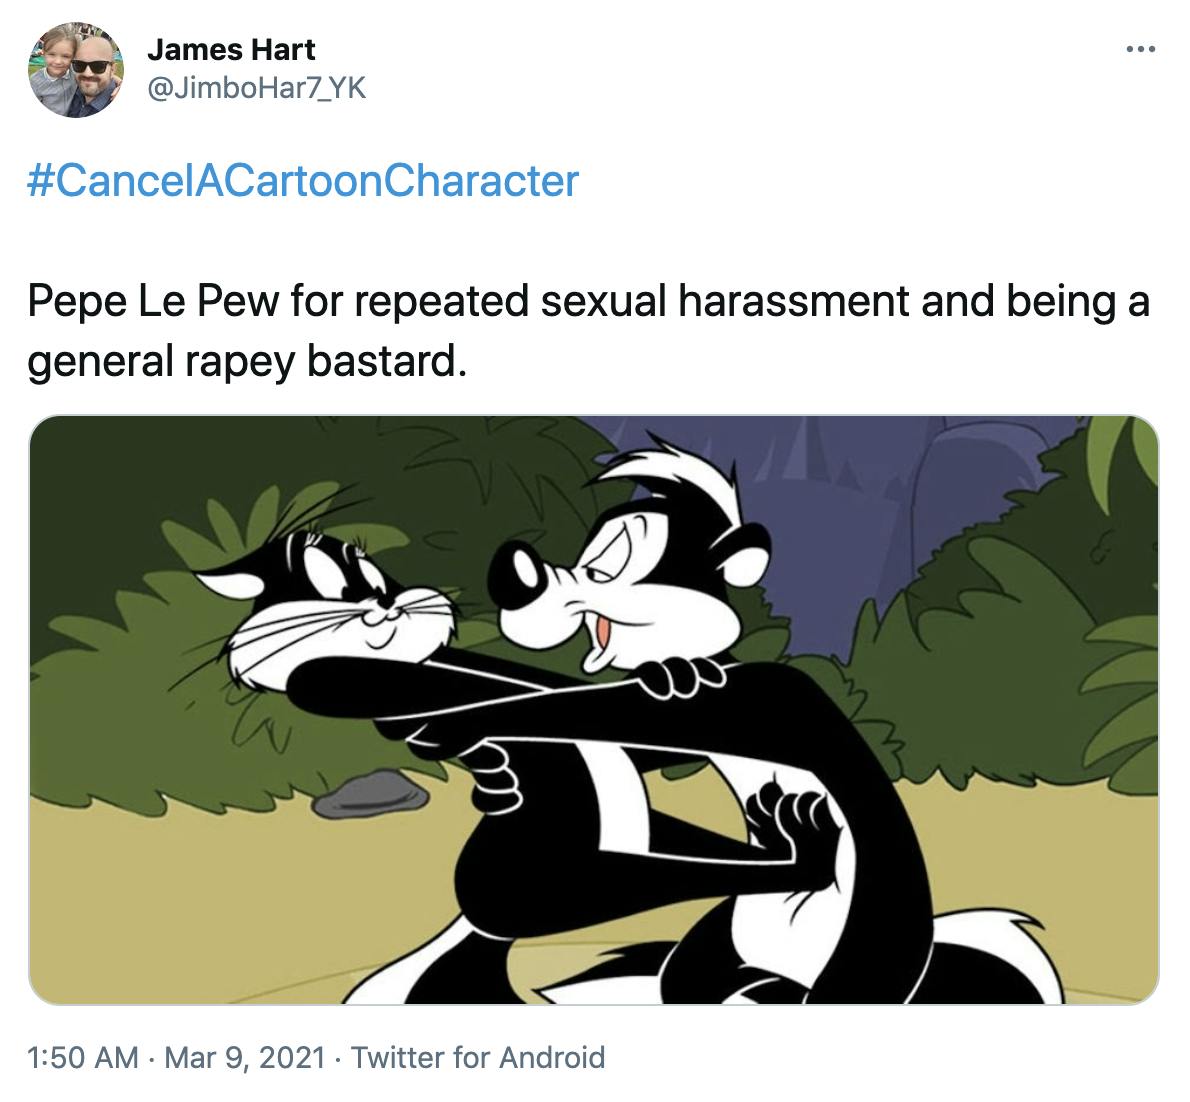 '#CancelACartoonCharacter Pepe Le Pew for repeated sexual harassment and being a general rapey bastard.' Picture of a black and white cat struggling to get away from Pepe le Pew, a cartoon skink